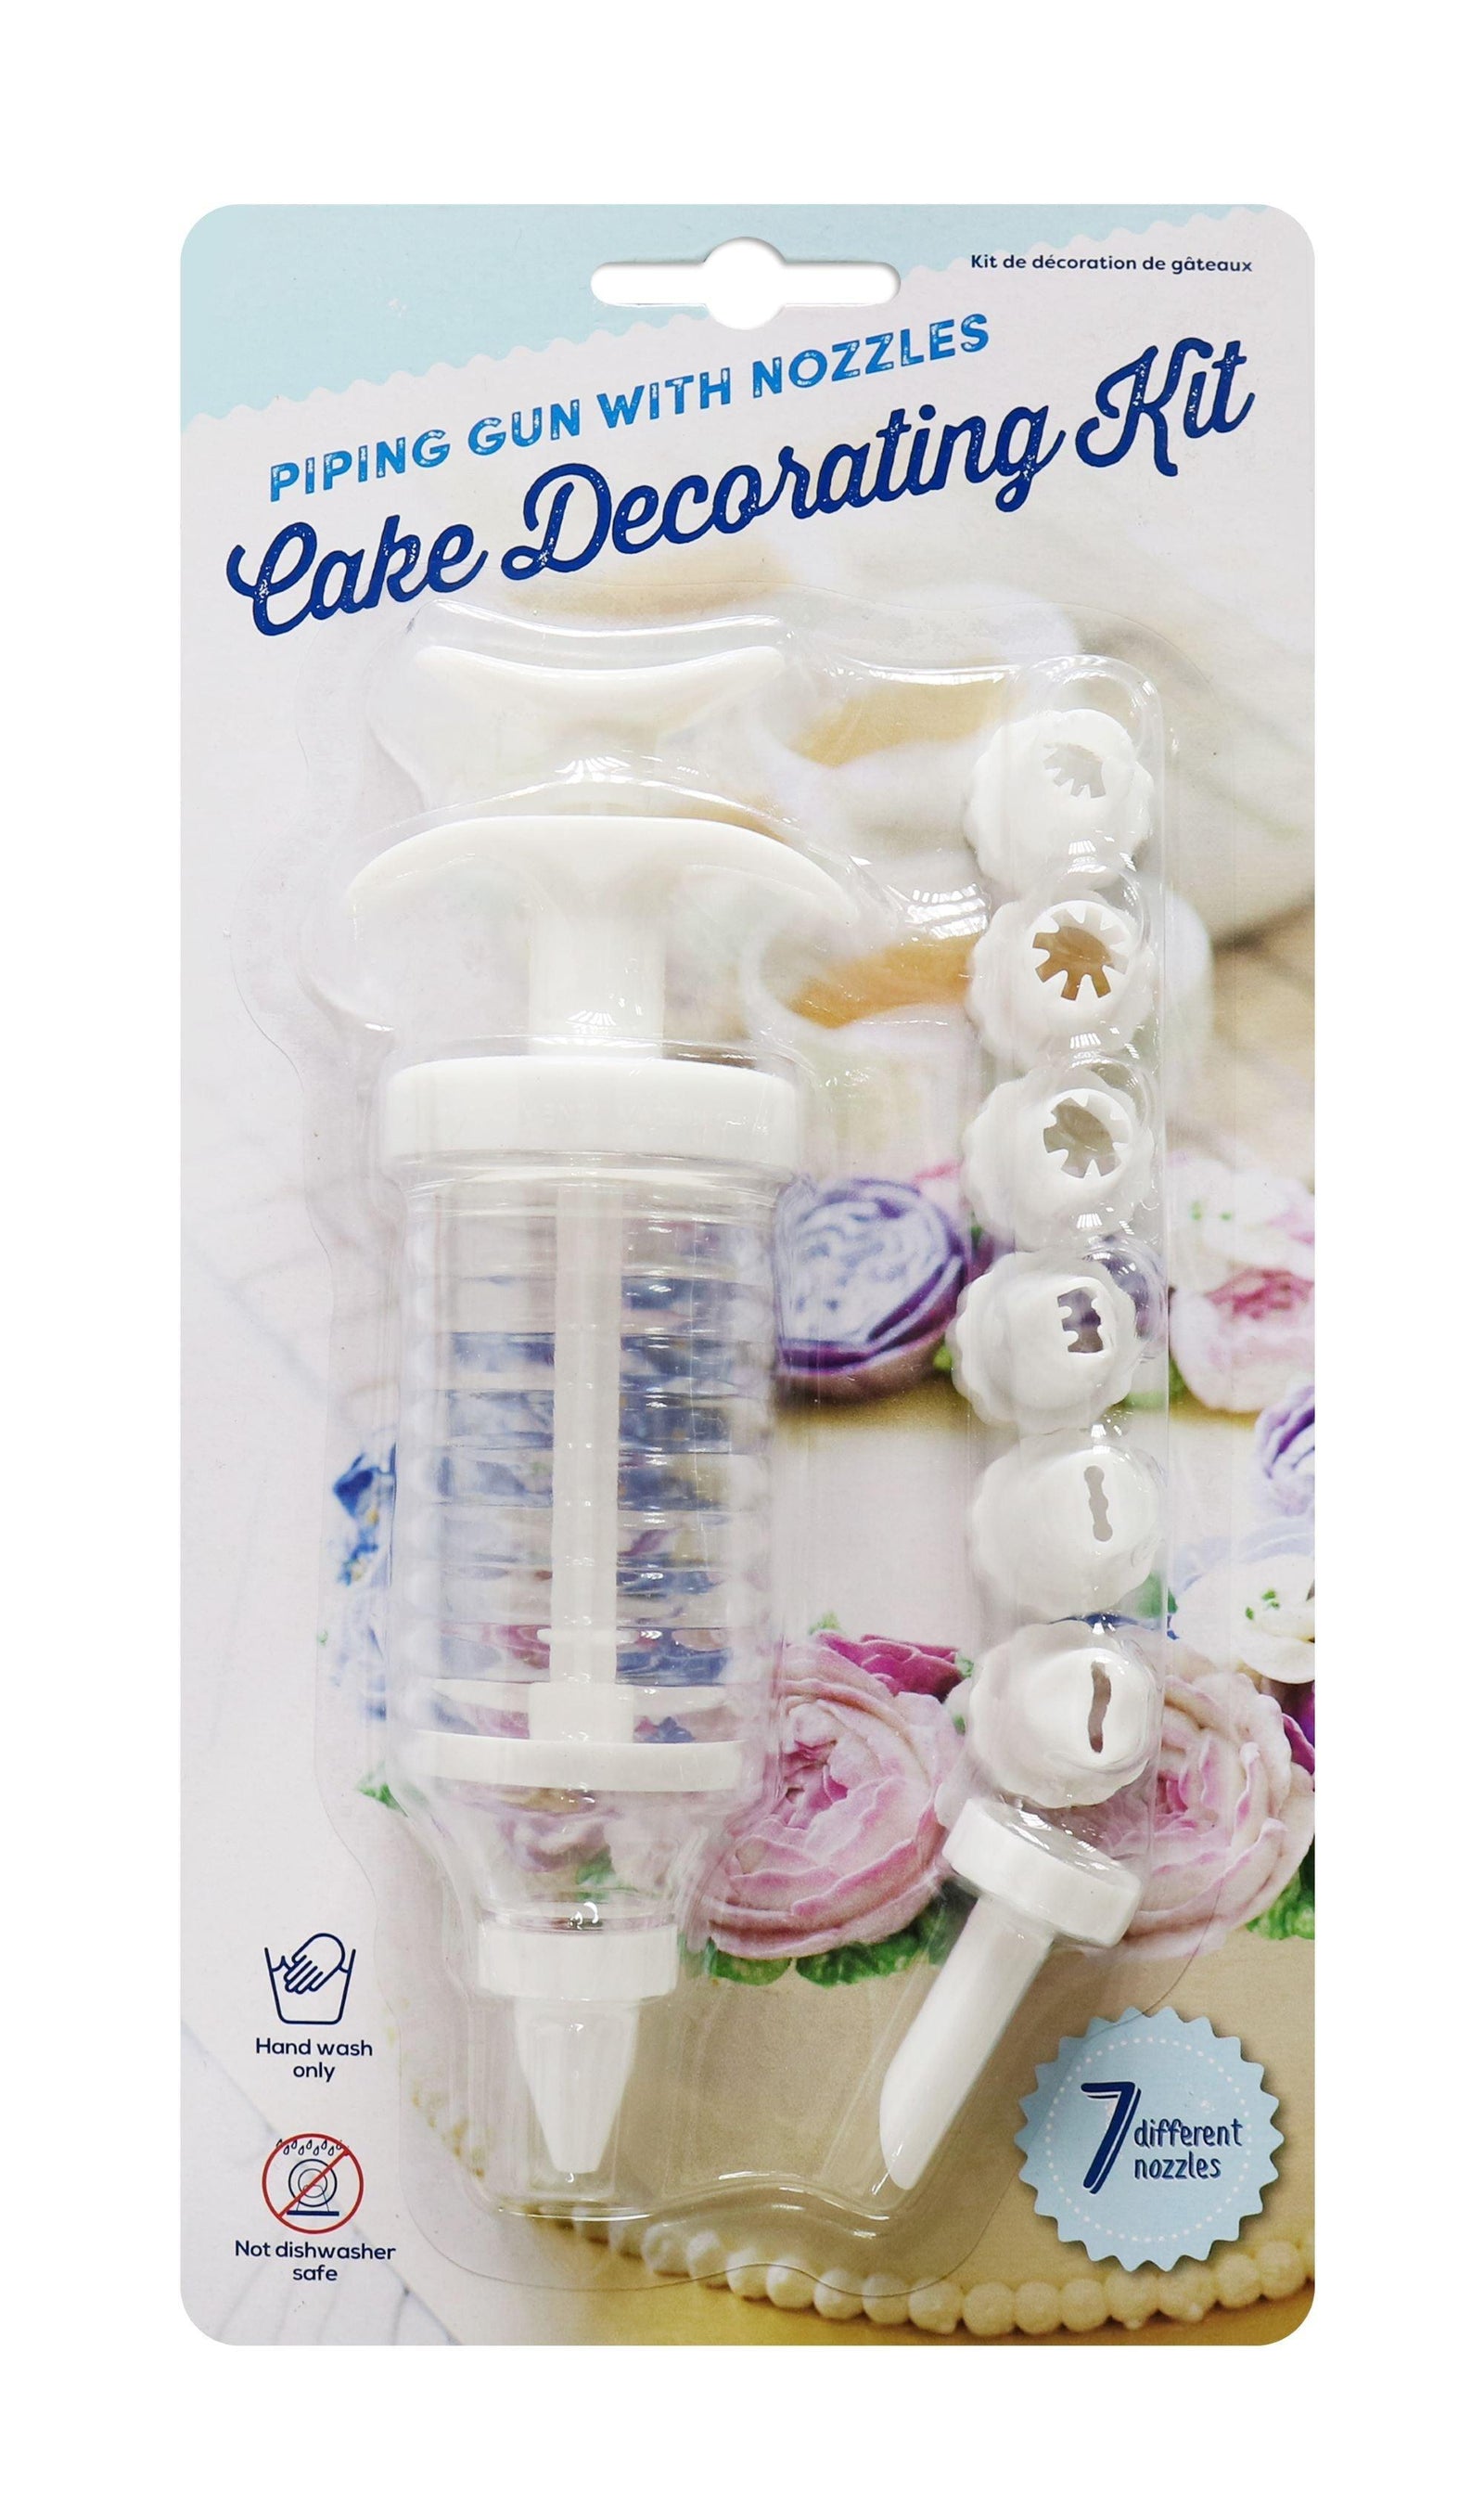 https://www.choicestores.ie/cdn/shop/files/cake-decorating-kit-or-icing-gun-and-7-nozzles-choice-stores_15440e88-5359-472a-9411-cbeb7fc83c87_1600x.jpg?v=1687423002